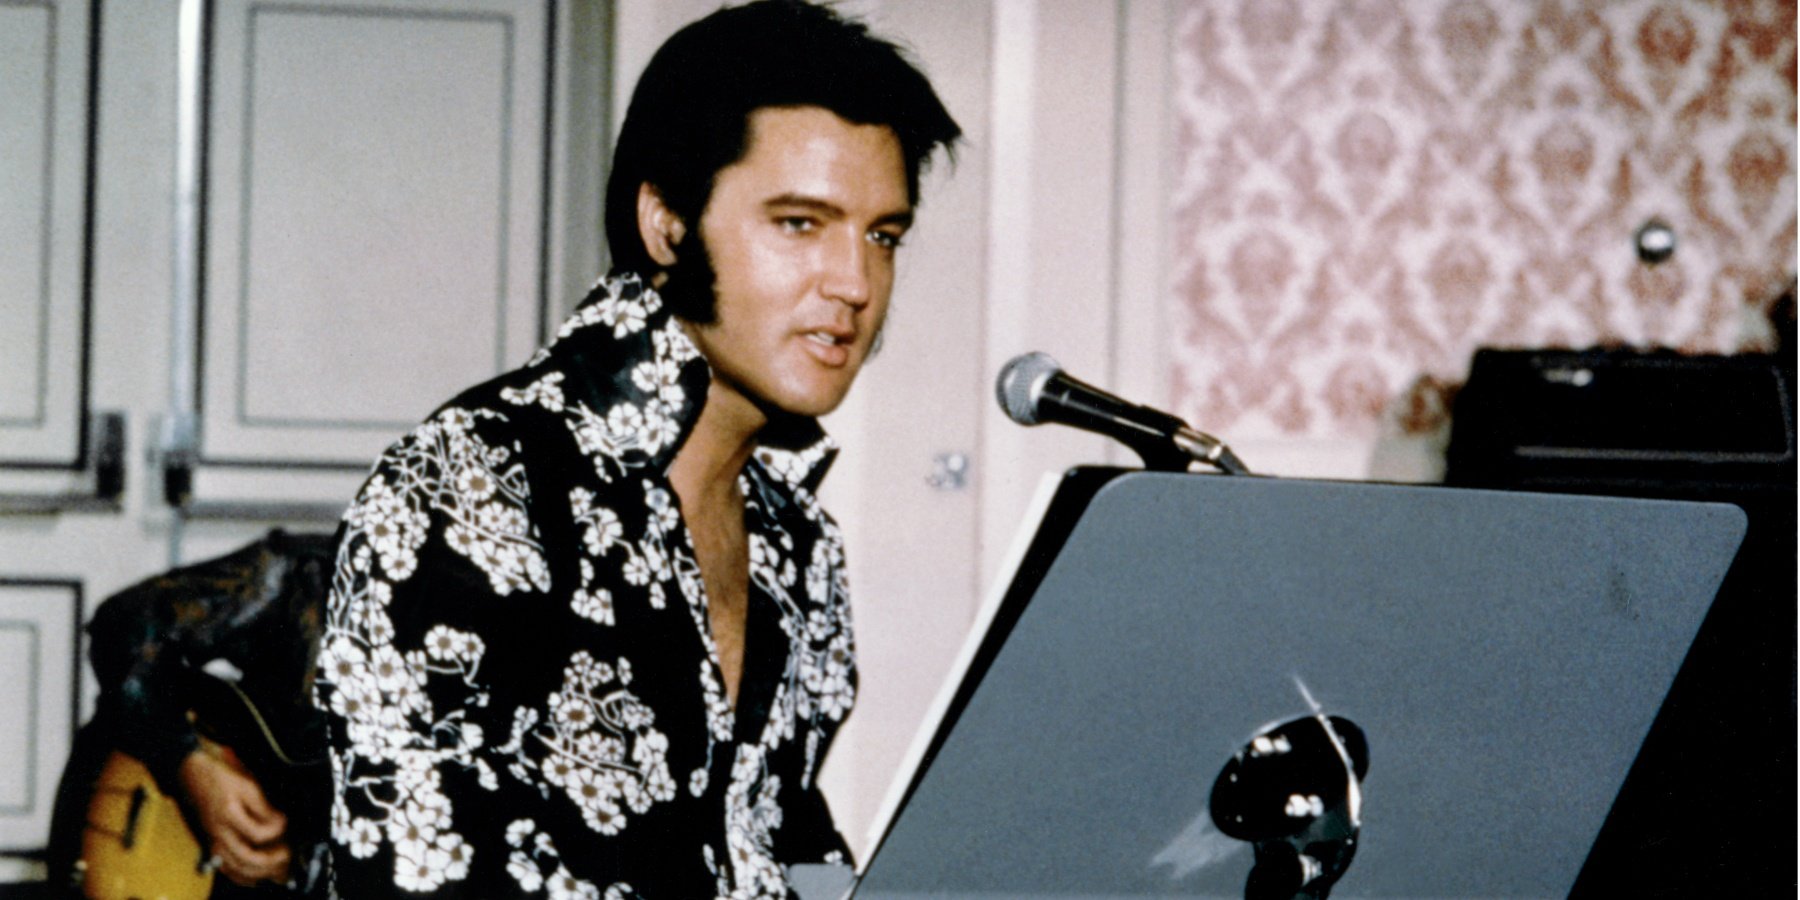 Elvis Presley: 1 Stage Costume From the 1970s Changed His Live Style Forever